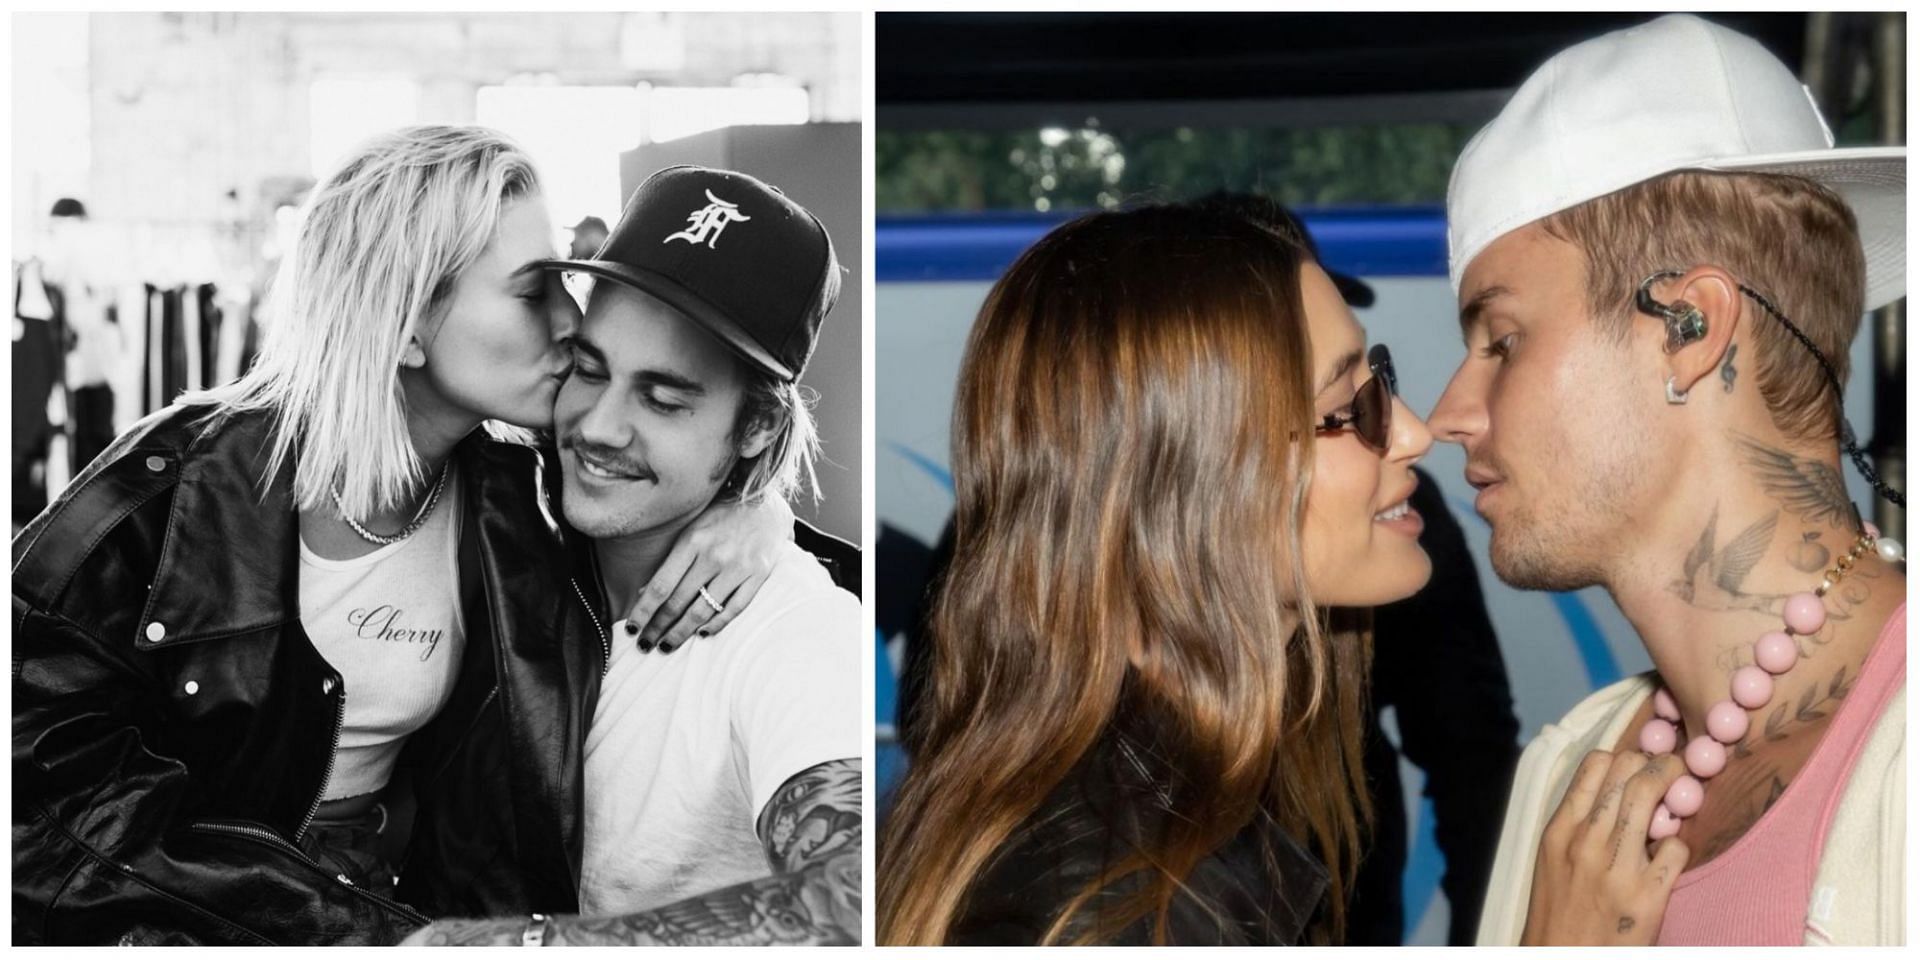 What did Hailey Bieber say about her marriage in the interview? Details and the timeline of their marriage explored. (Image via Instagram)